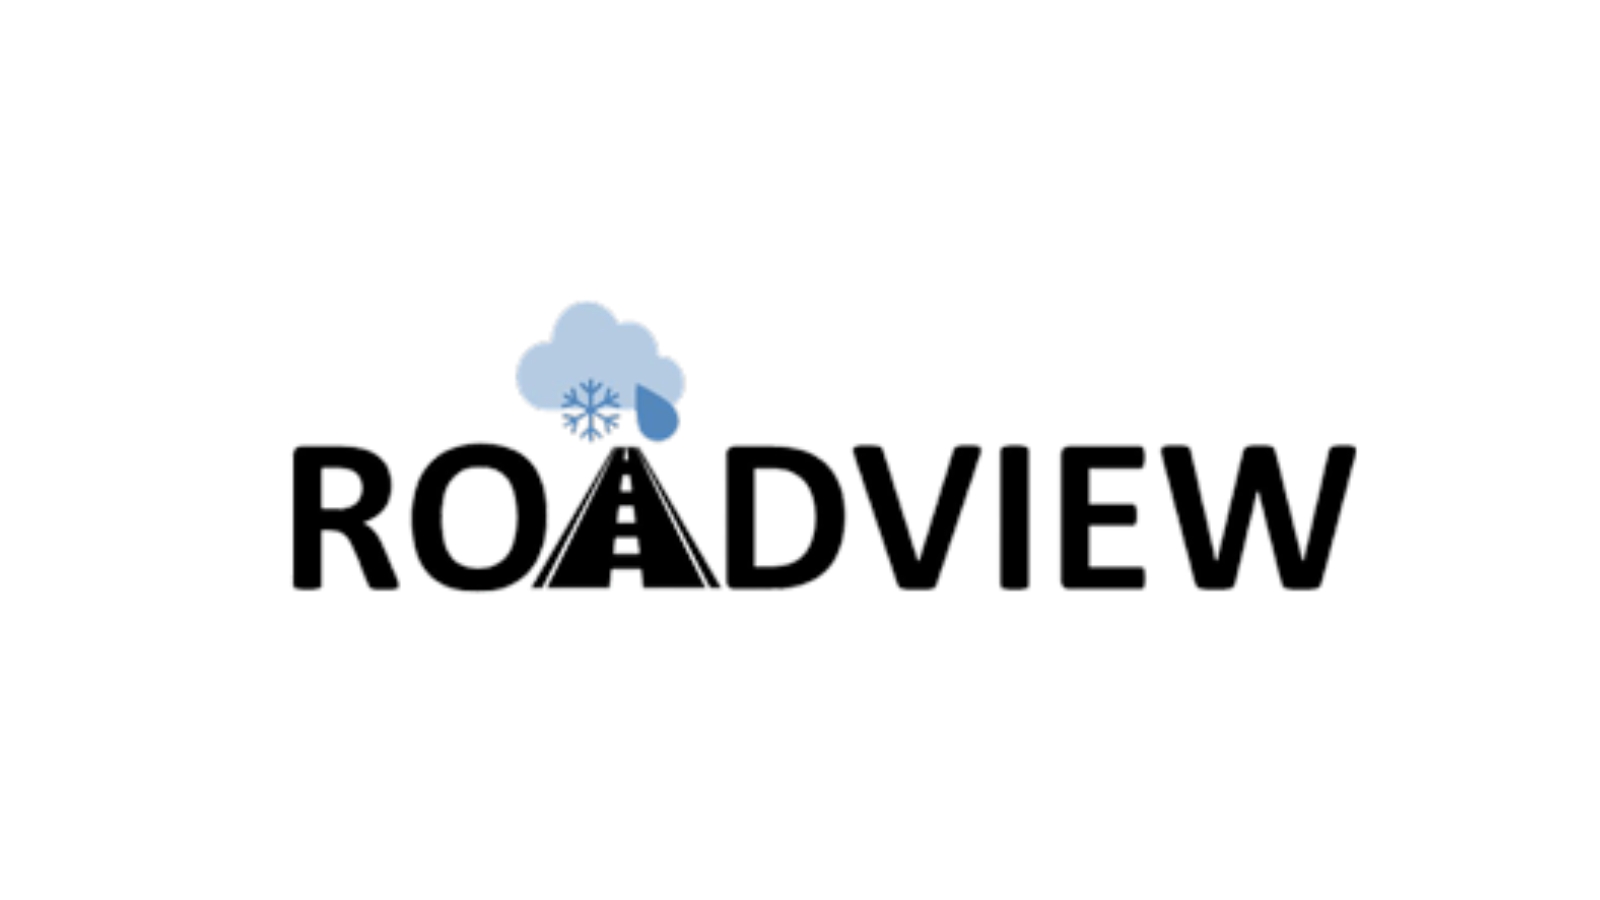 Register for the ROADVIEW project newsletter